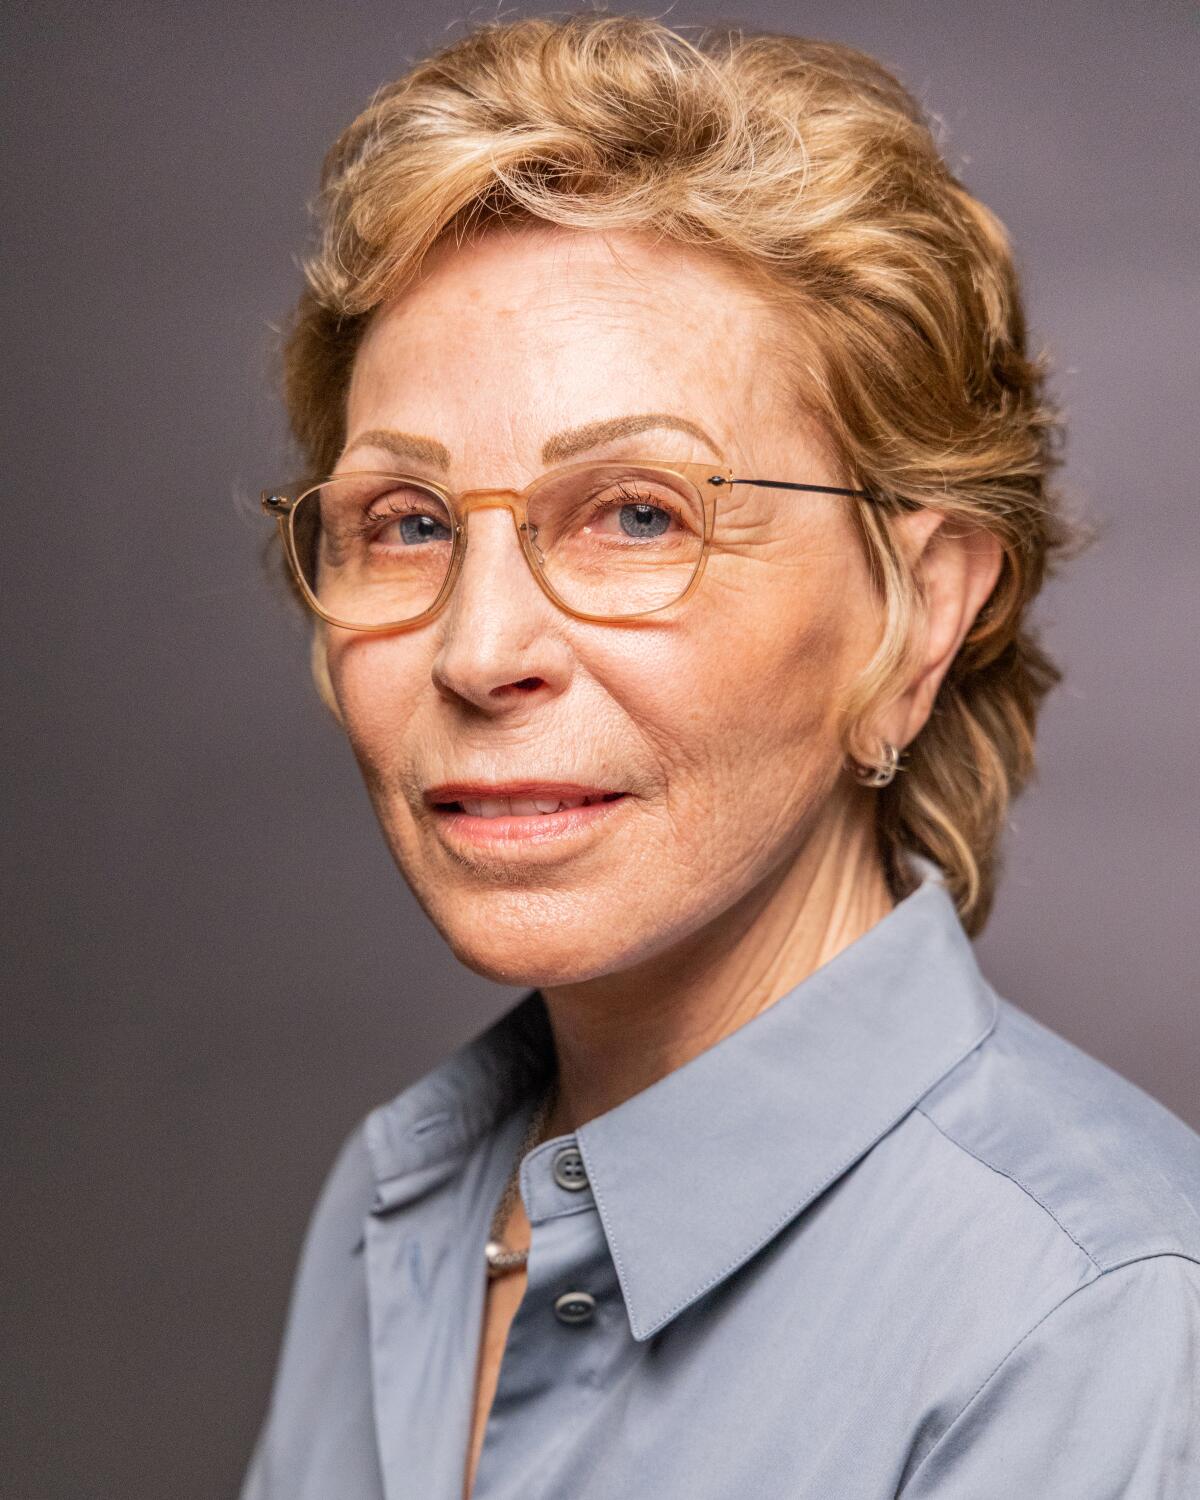 A portrait of a woman with short blonde hair and glasses wearing a gray collared shirt.